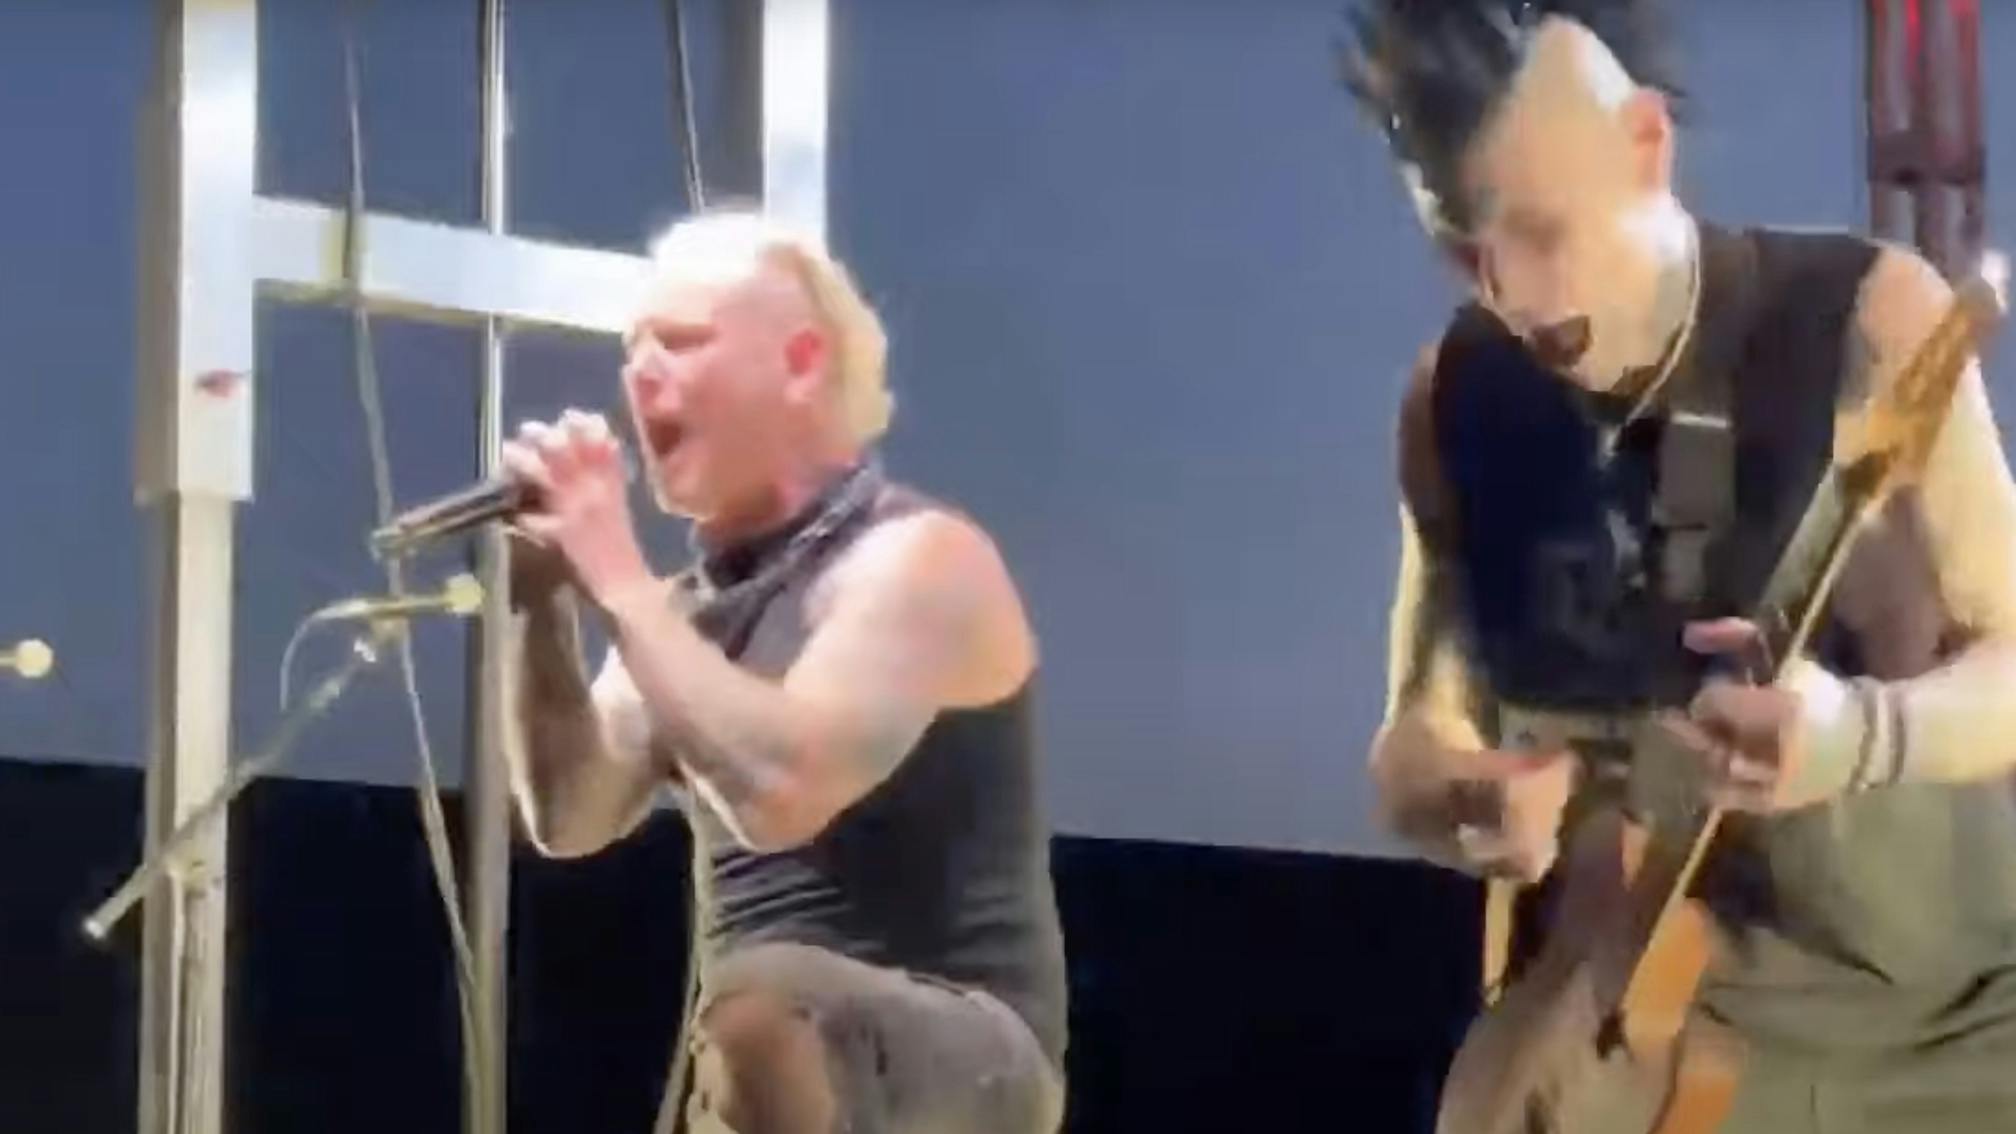 Maskless Corey Taylor performs Slipknot's Wait And Bleed at solo show for first time